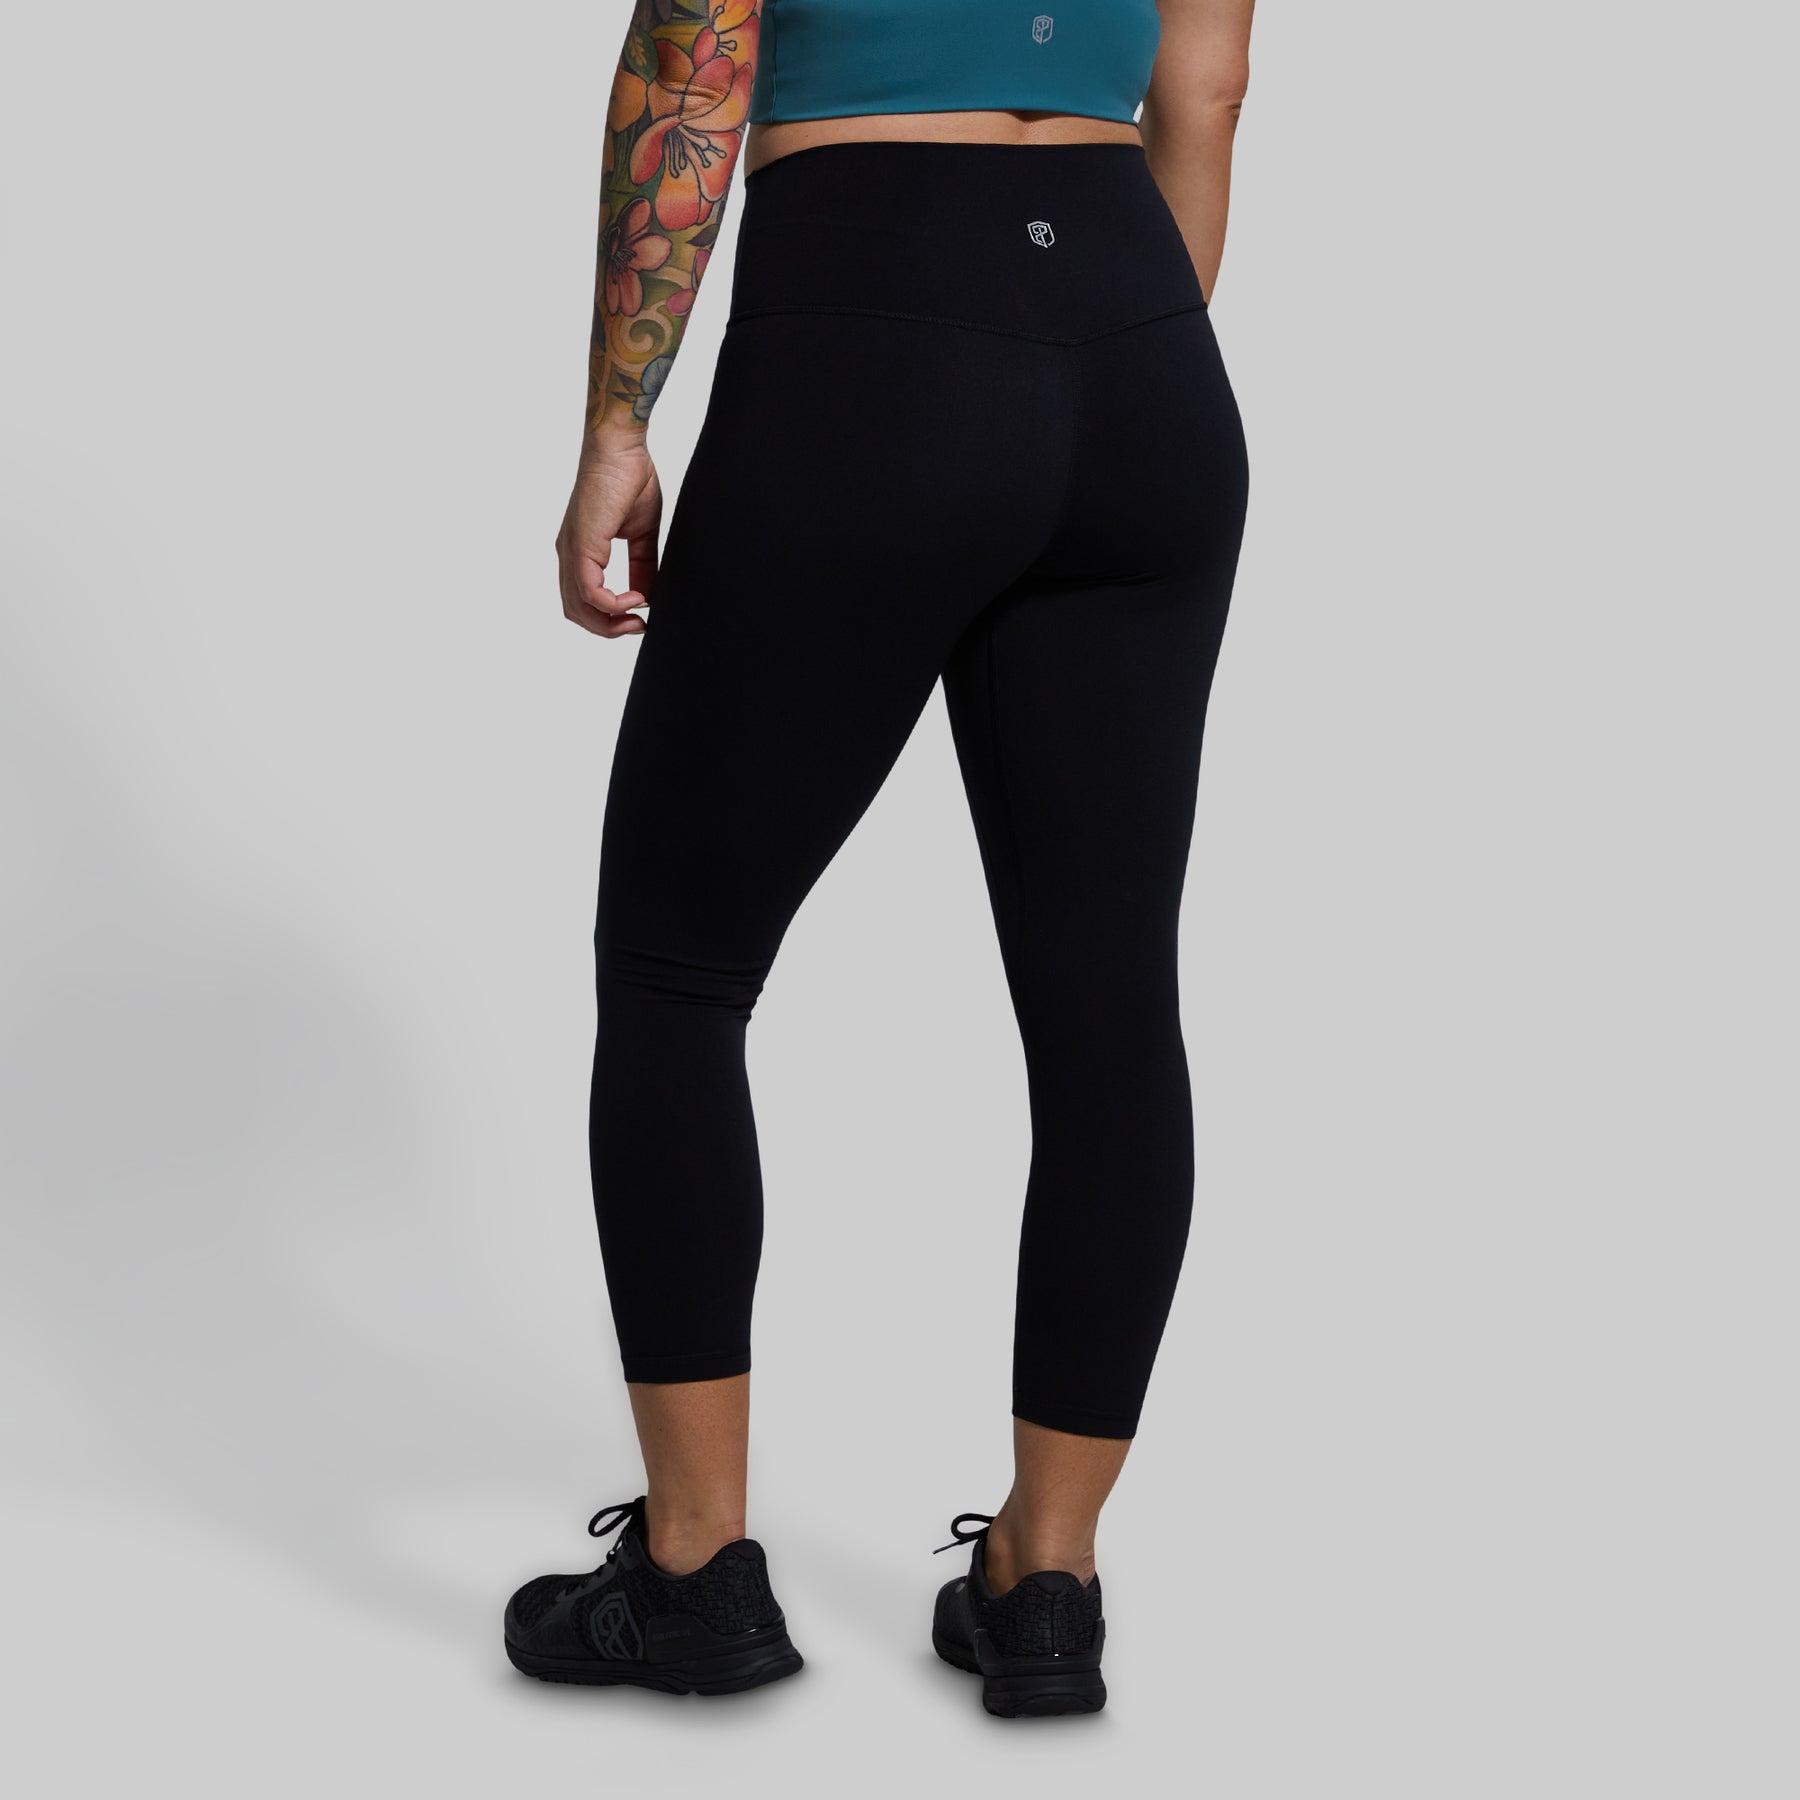 Born Primitive Inspire Leggings with Four-Way Stretch